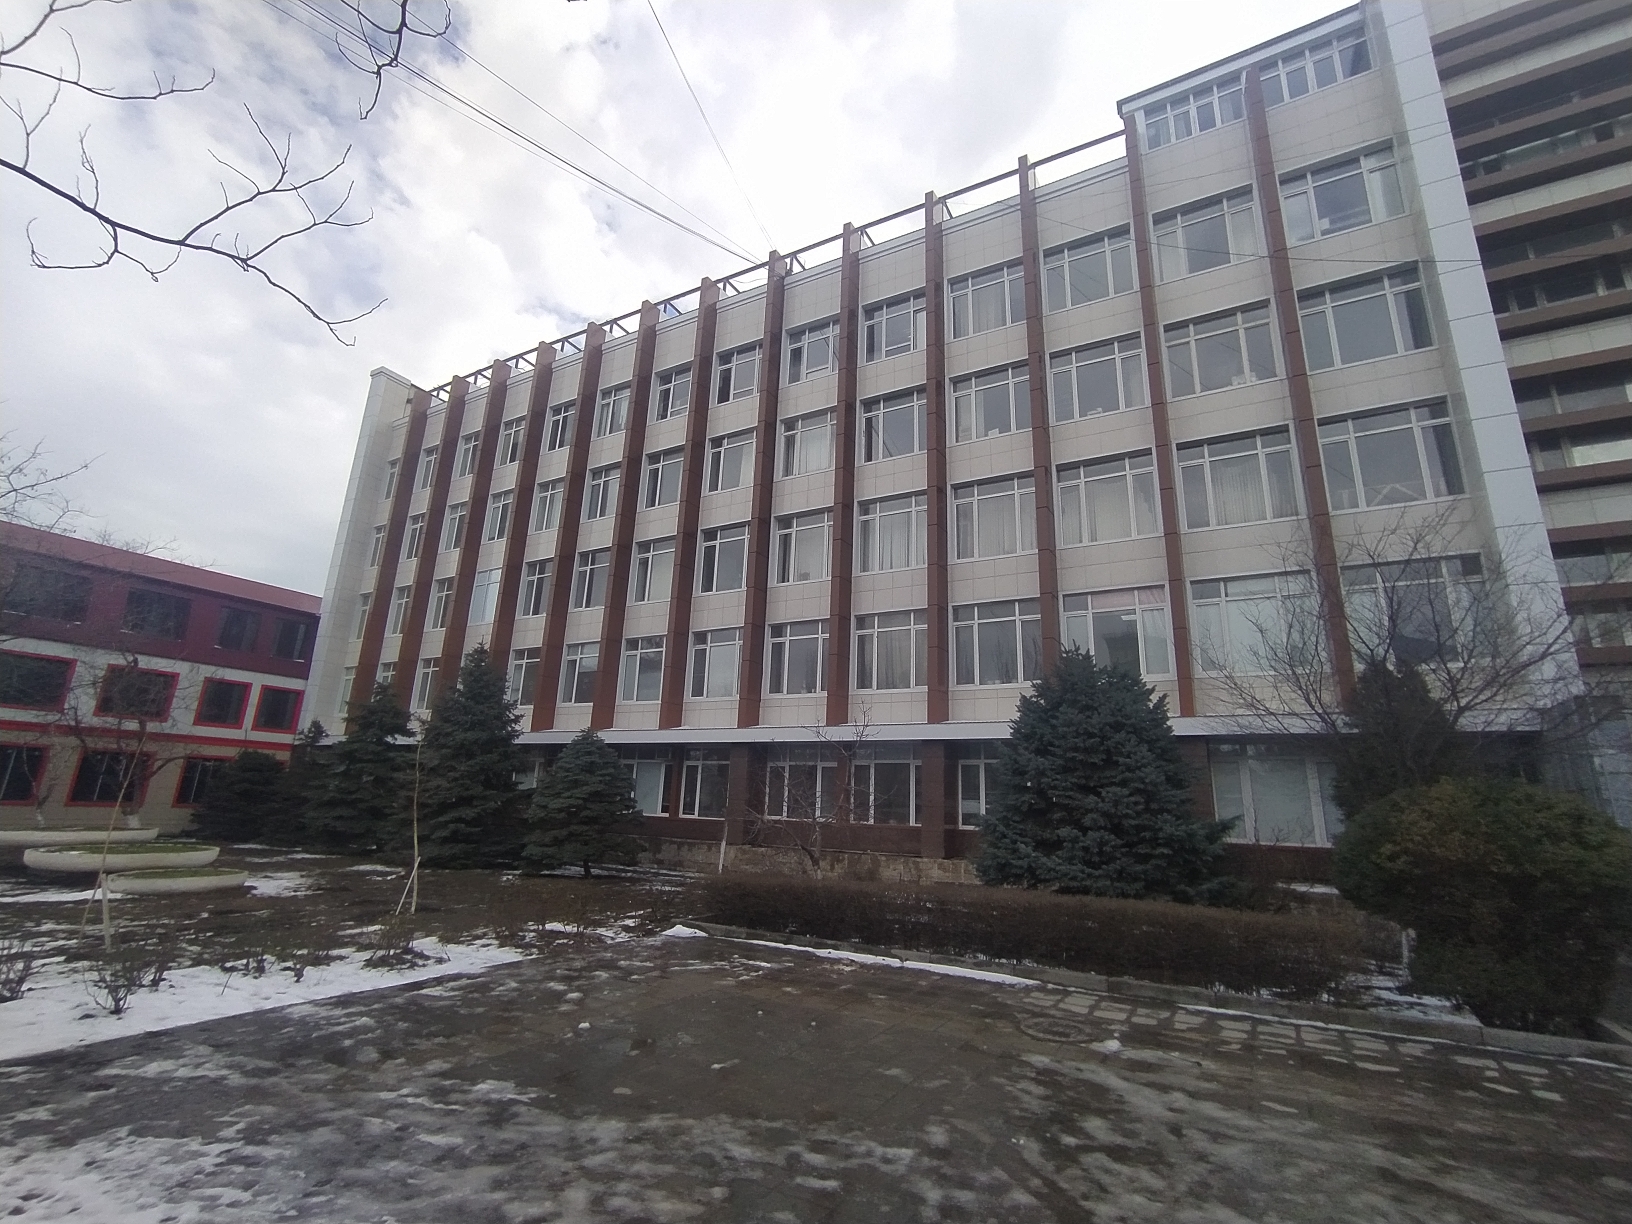 "Major repairs of the administrative building of the Ministry of Economy and Territorial Development of the Republic of Tatarstan, located at the address: Makhachkala, Abubakarov (Chernyshevsky) str. 67 (1st stage)".